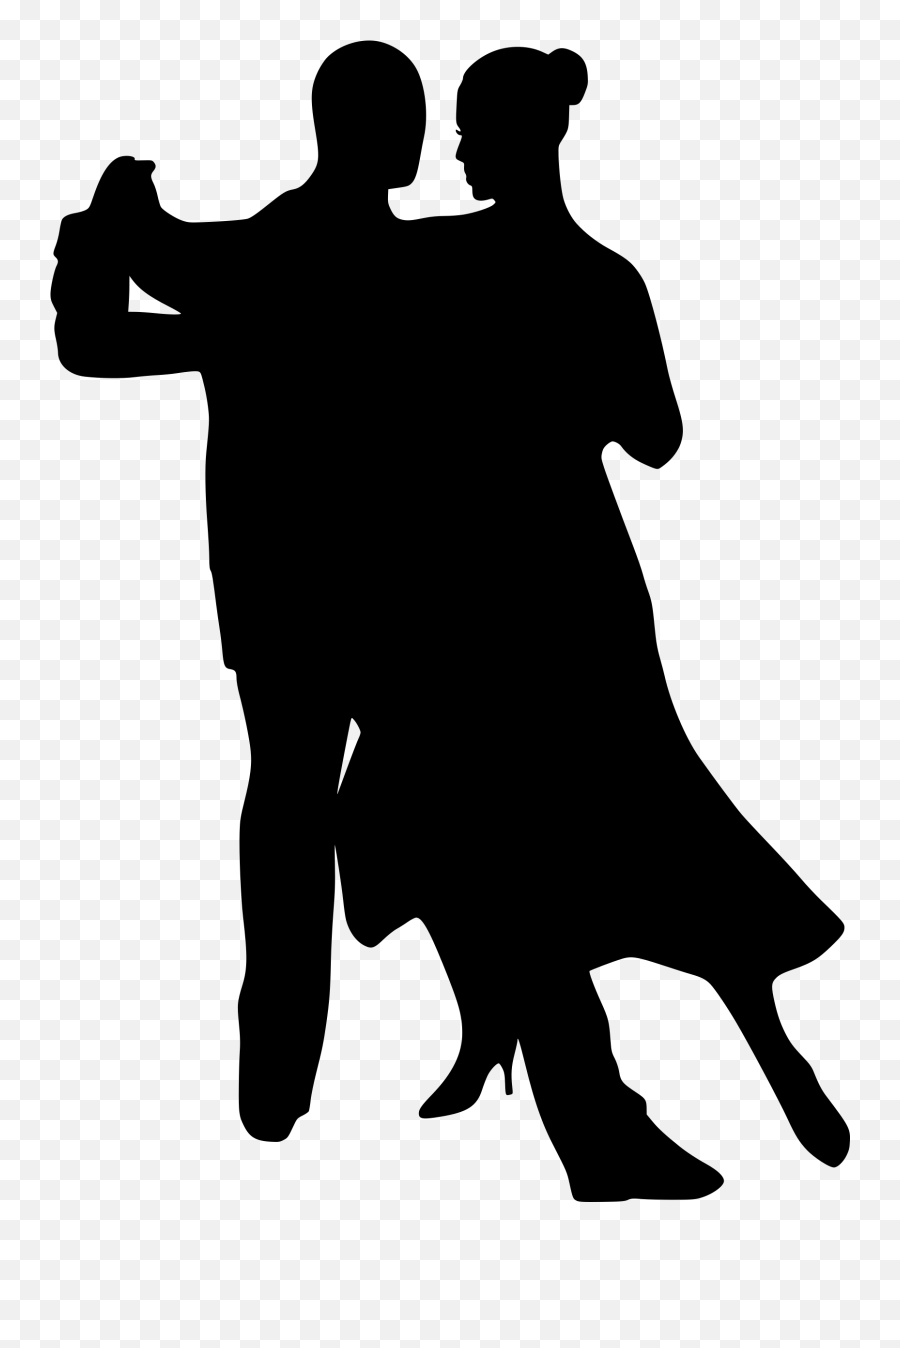 Dance Silhouette Clip Art - Embracing Couple Png Download Transparent Background Png Clipart Dancing Silhouette Couple Emoji,Couple Dancing Emoji